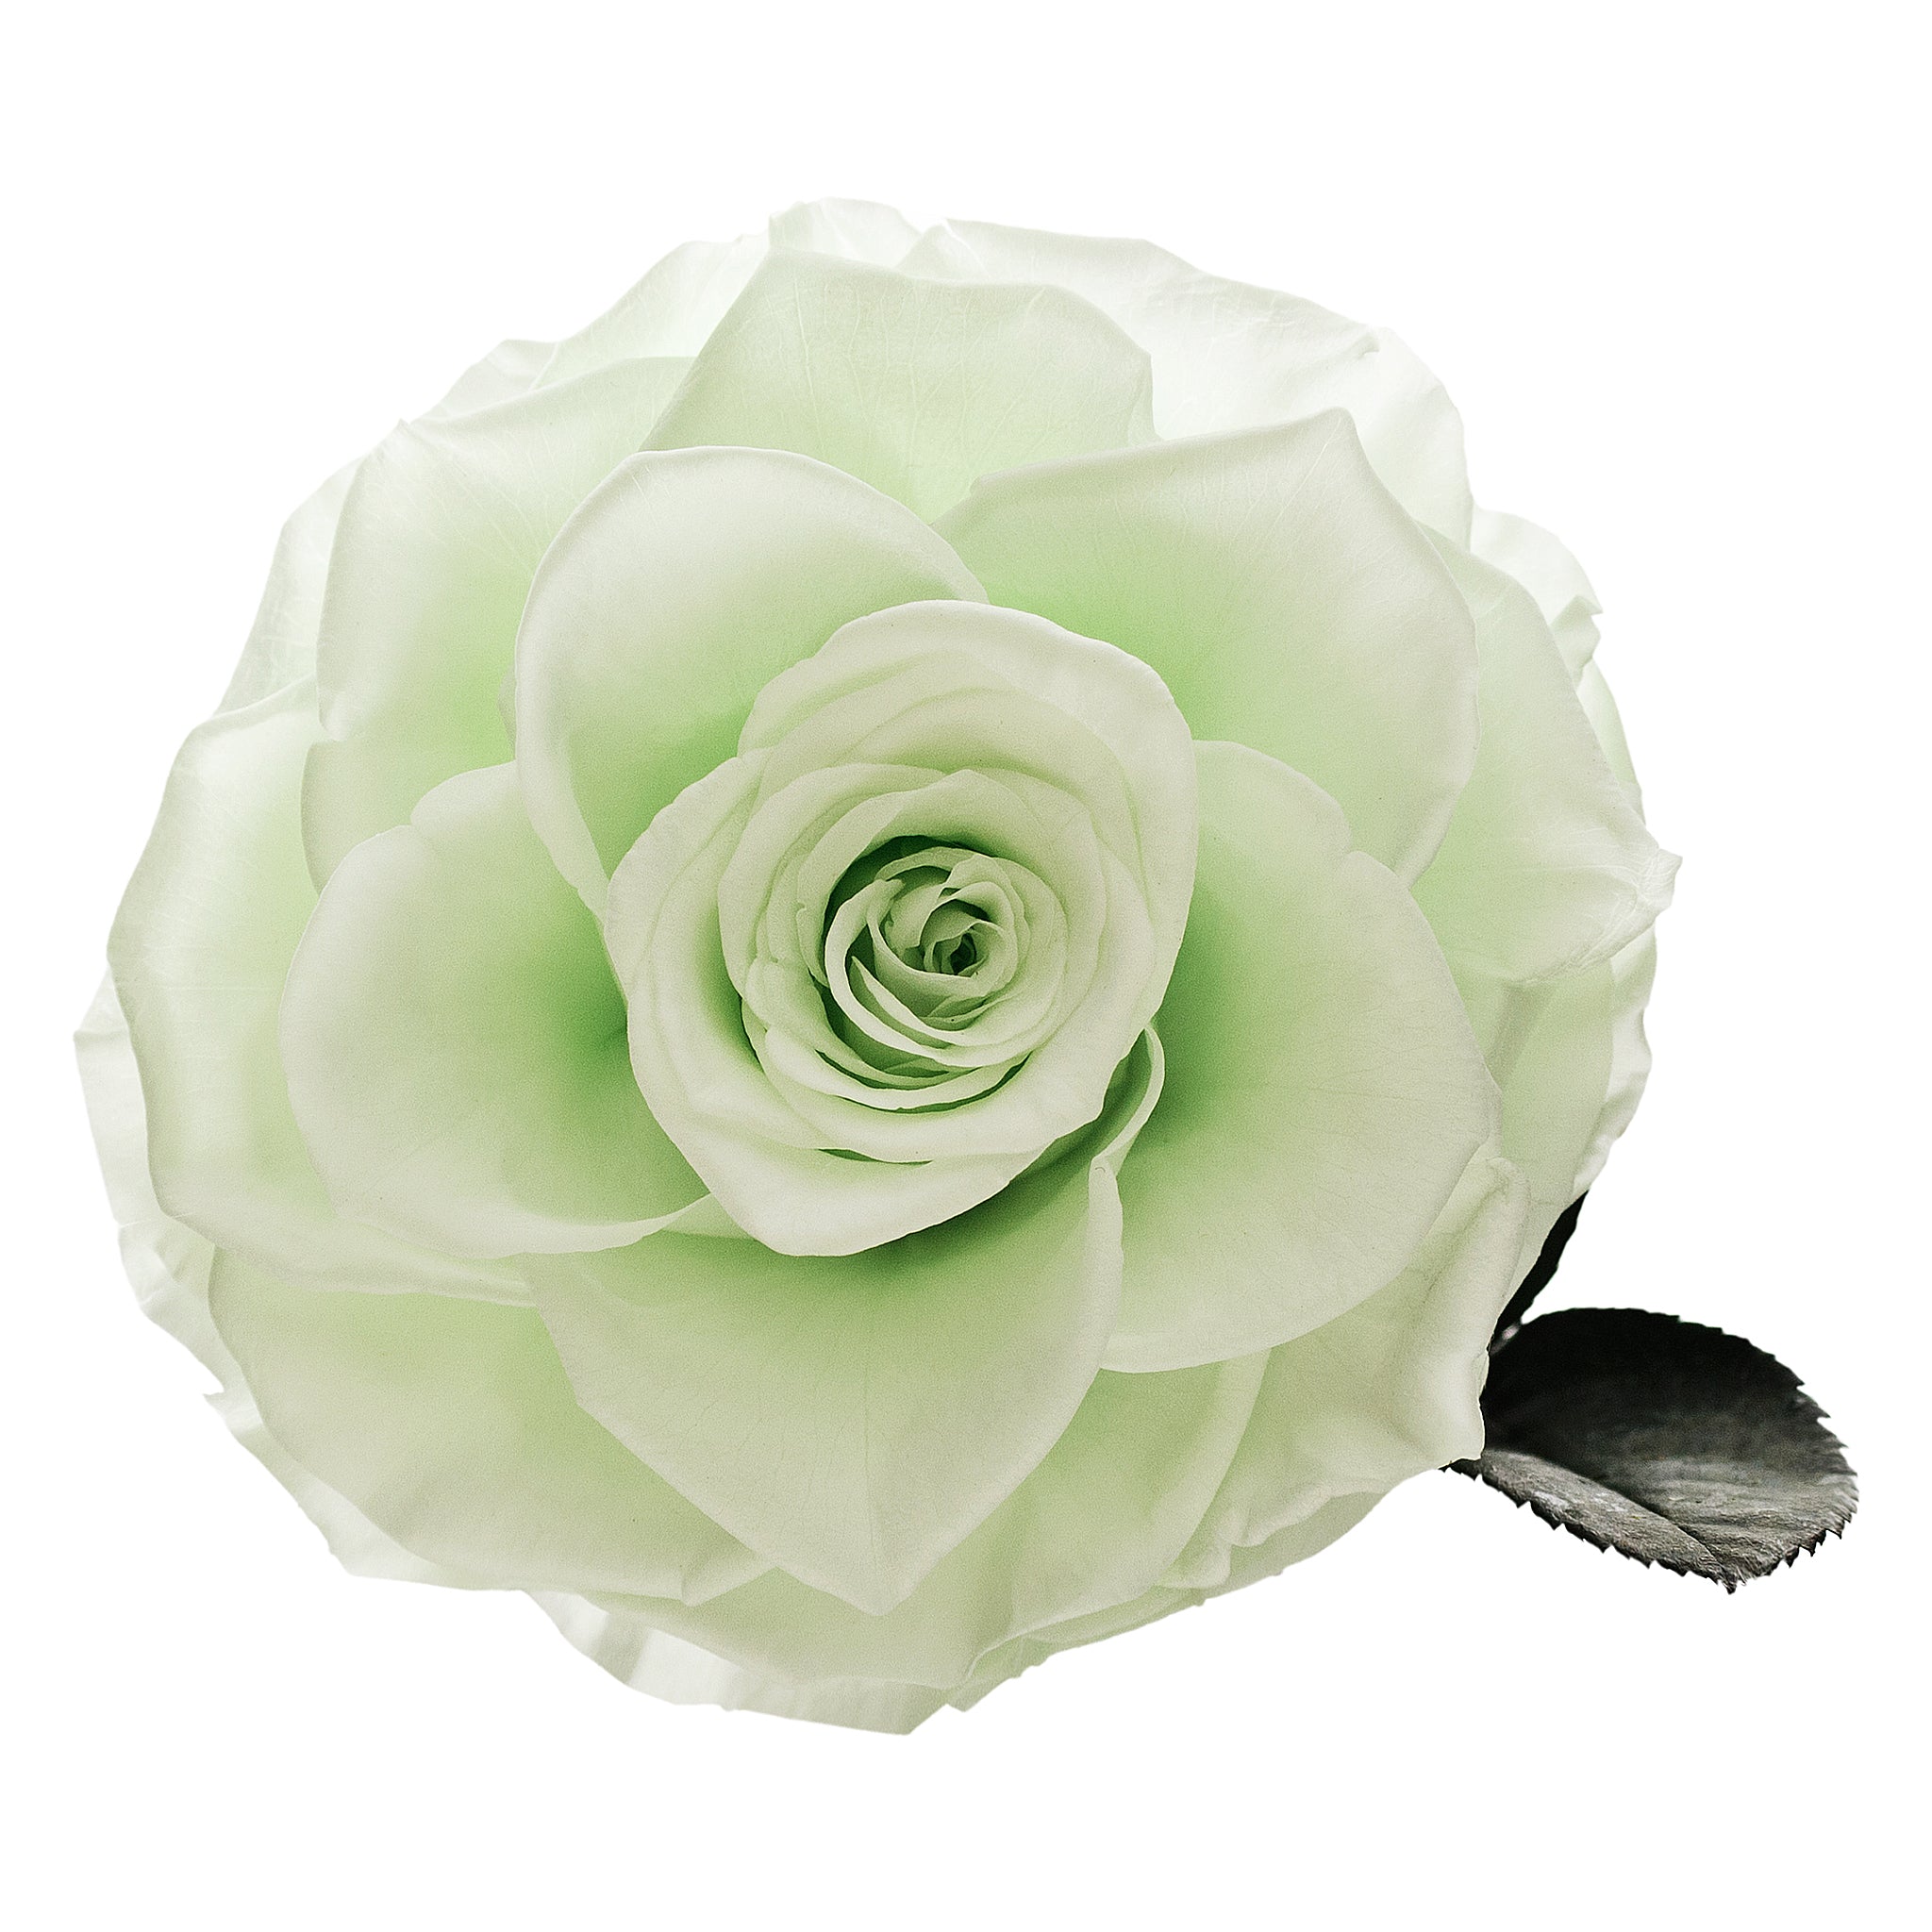 Medium Mint Infinity Rose in Glass Dome